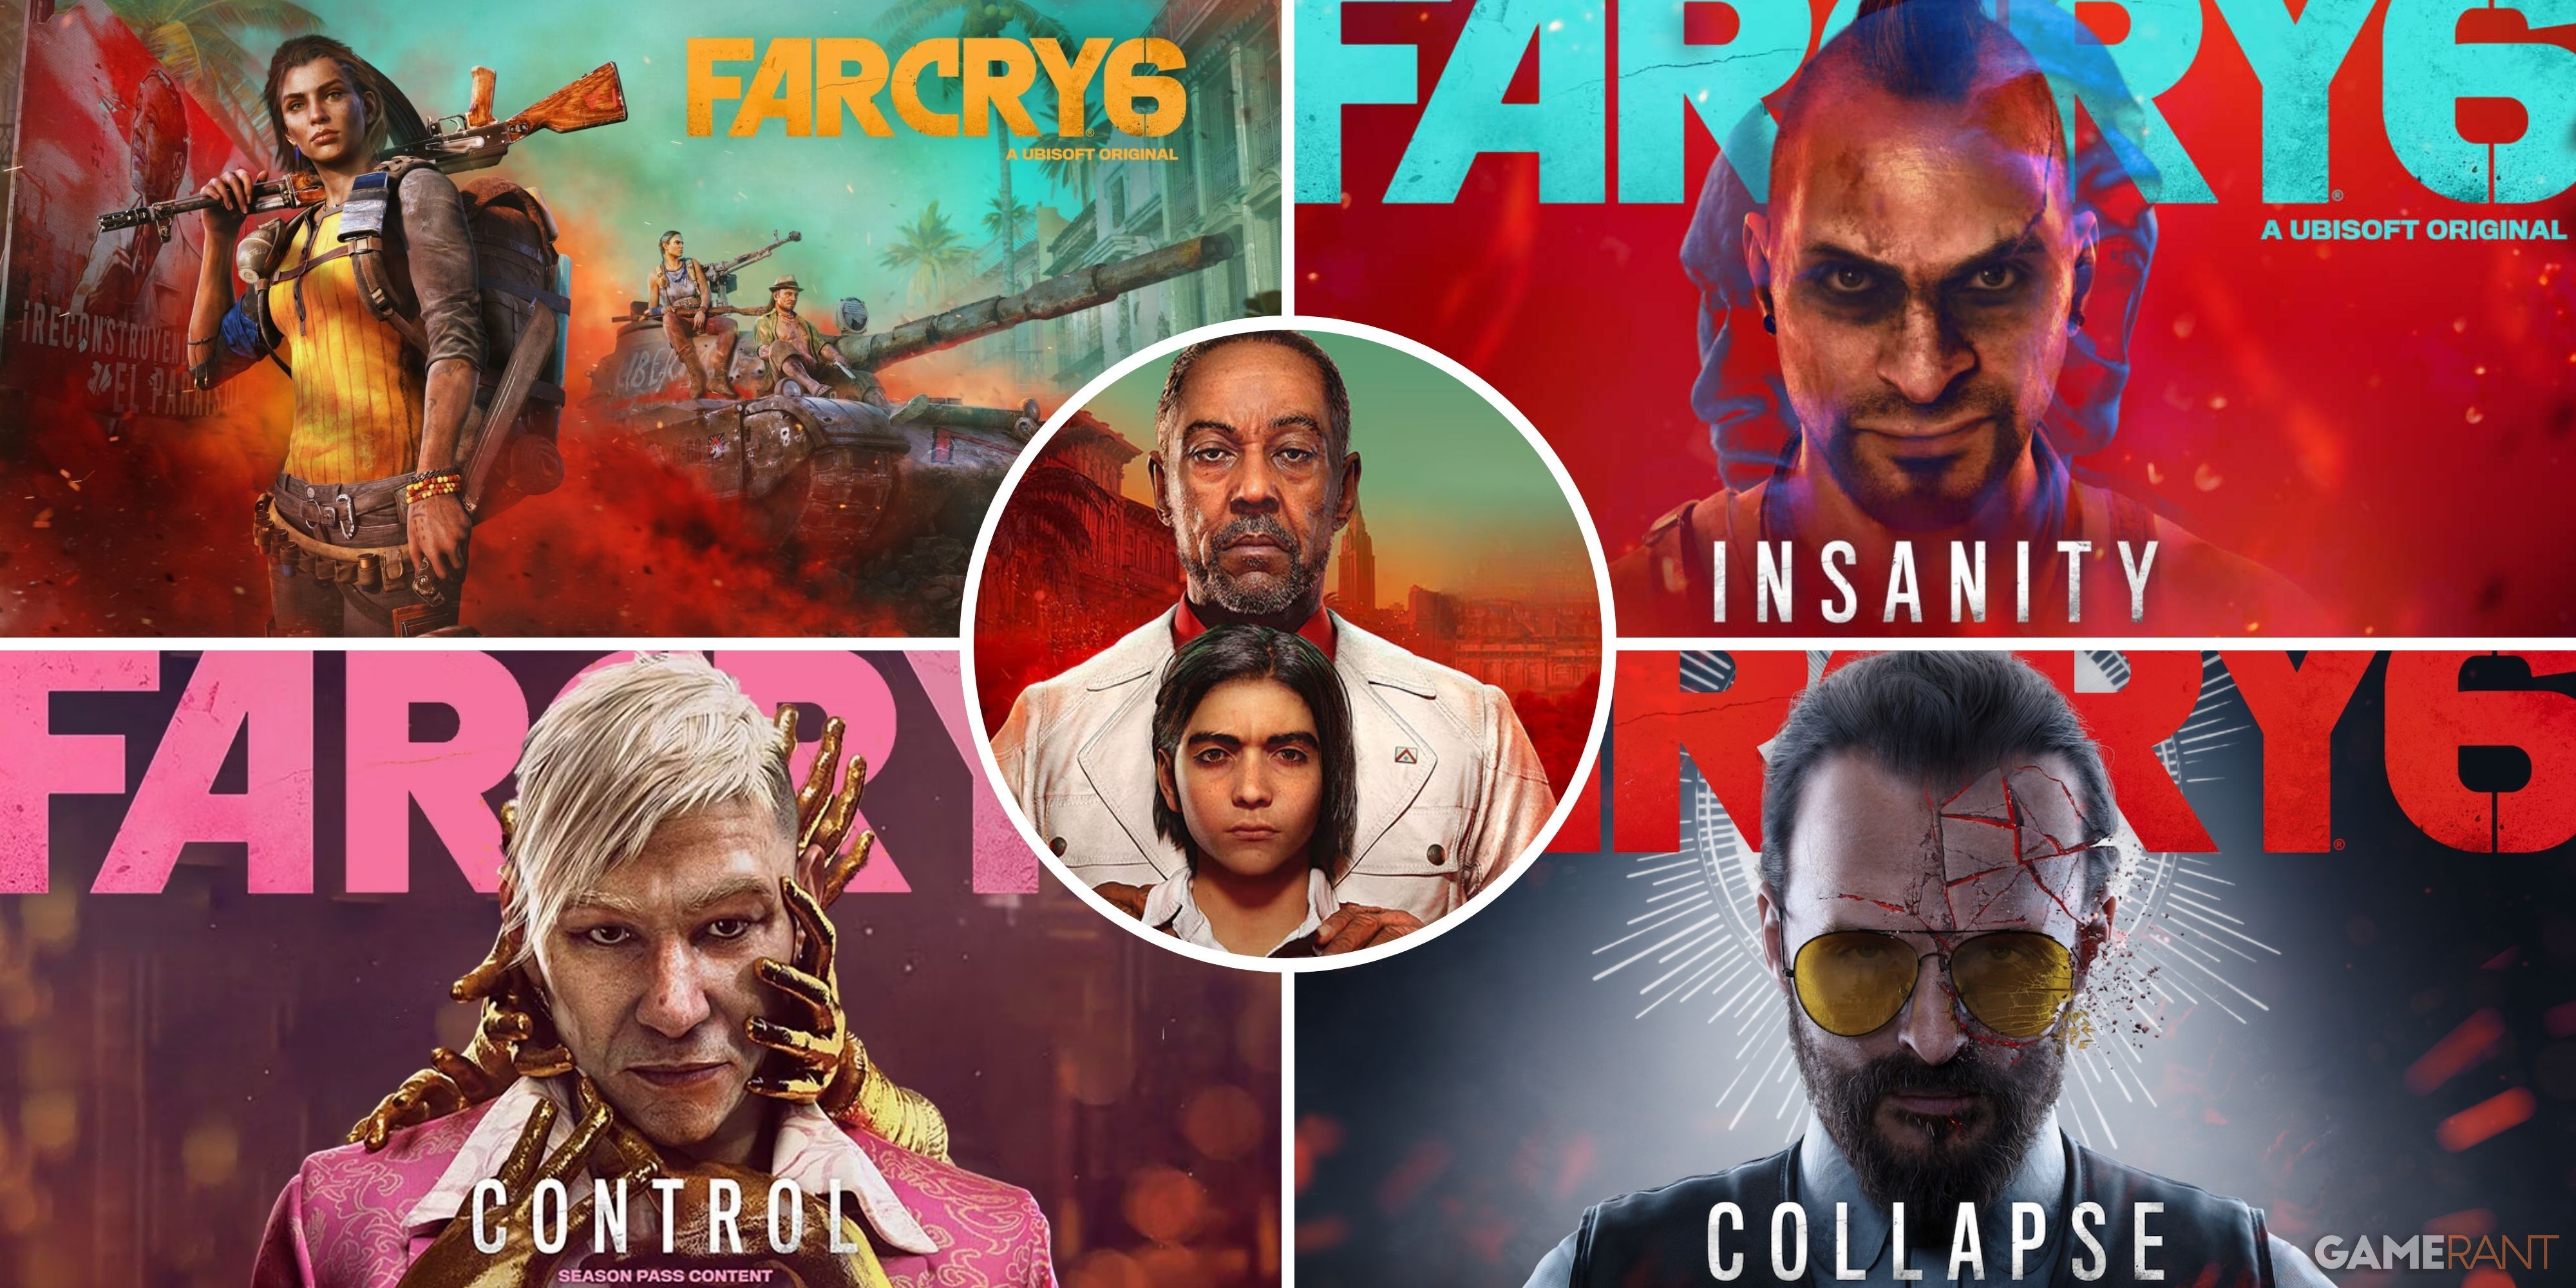 Far Cry 6 and its DLCs